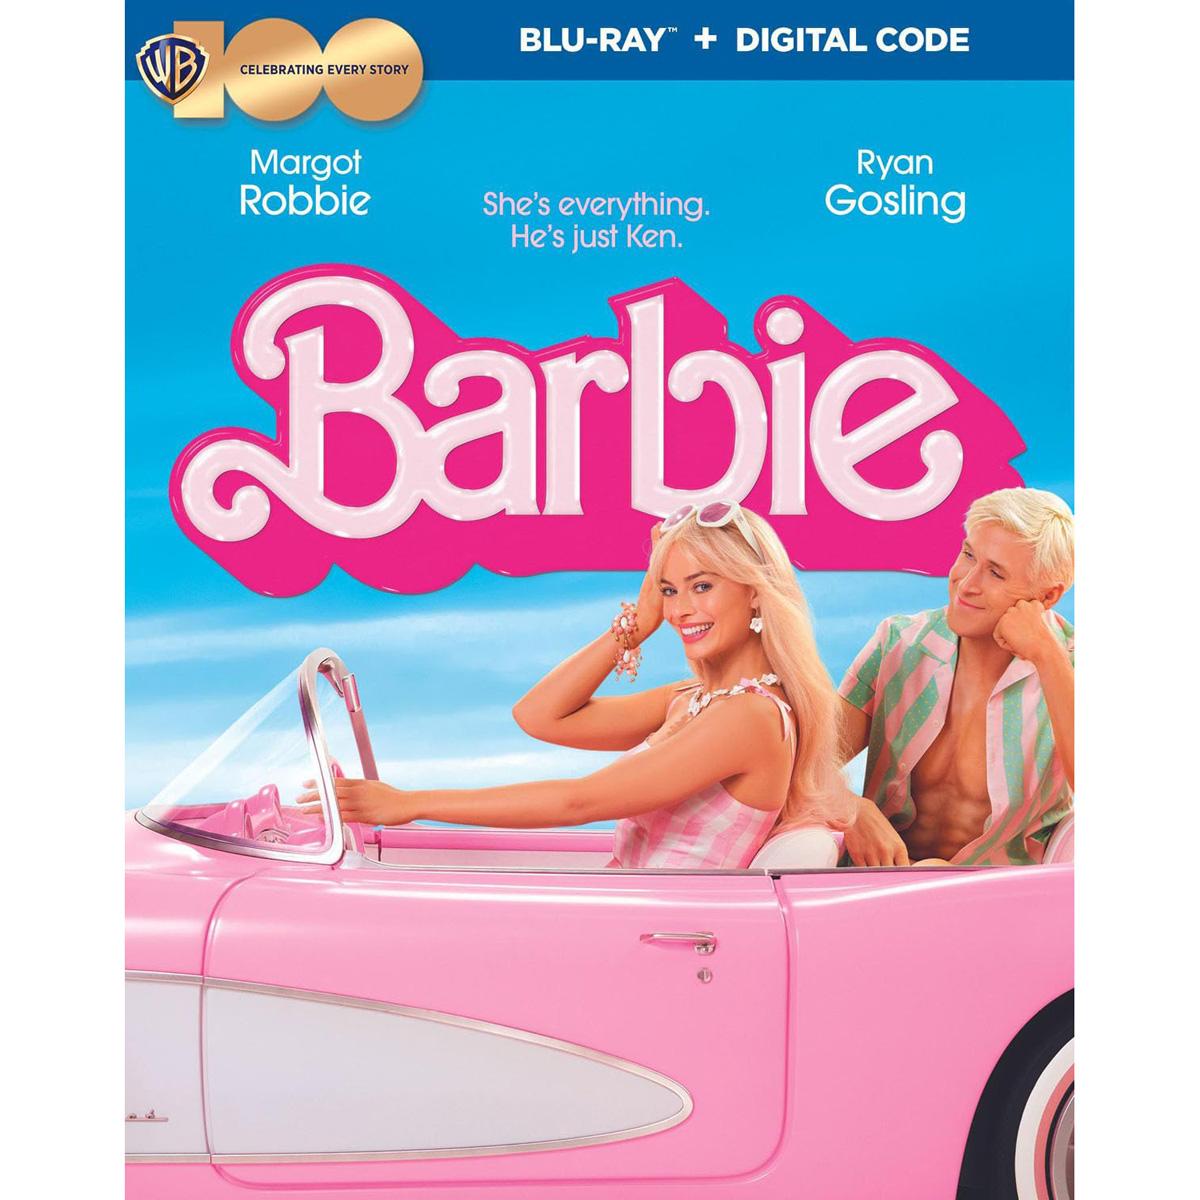 Barbie Blu-ray for $12.99